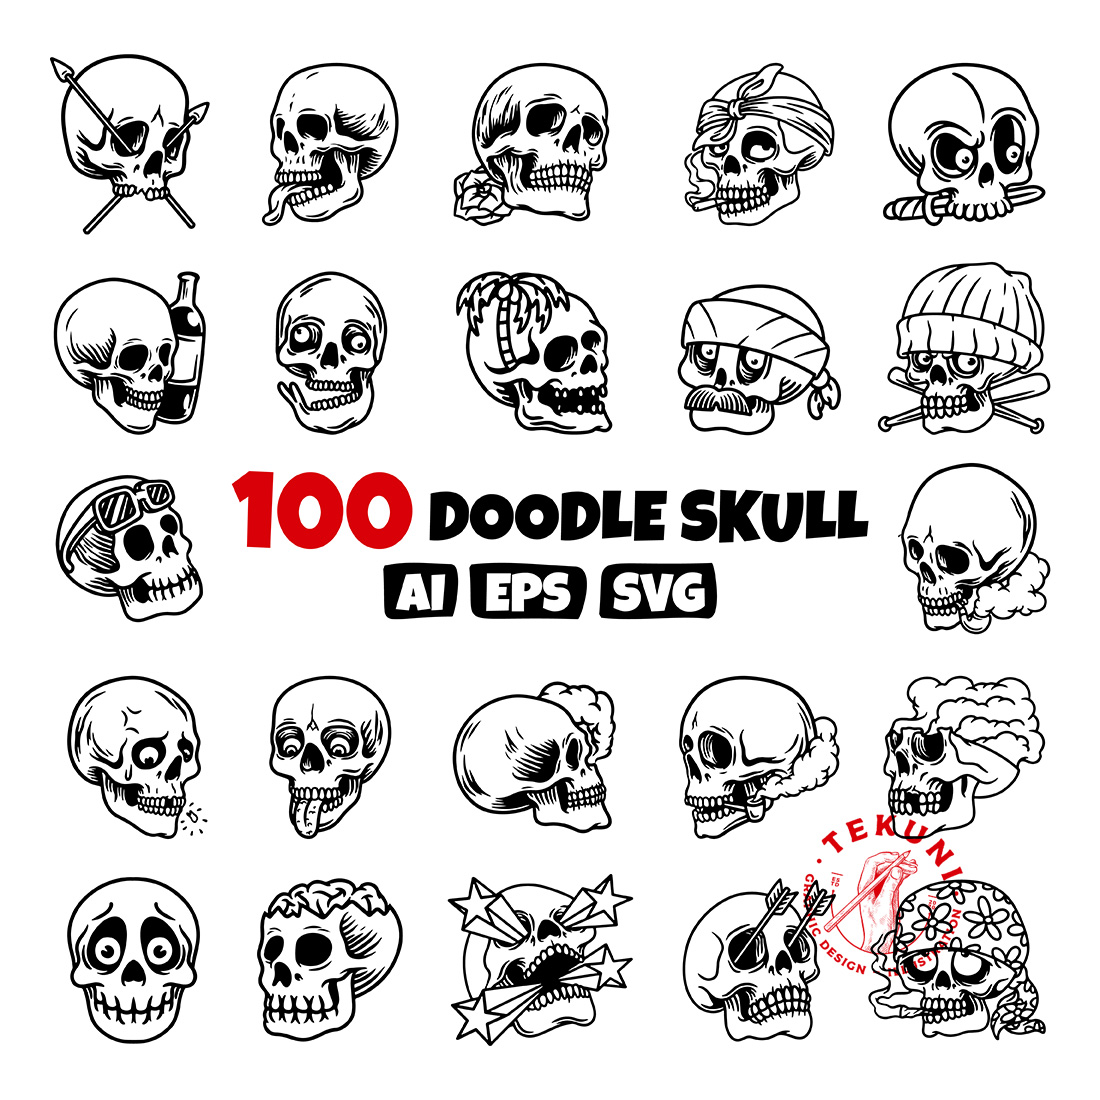 Doodle Skull Vector Hand-drawn Bundle cover image.